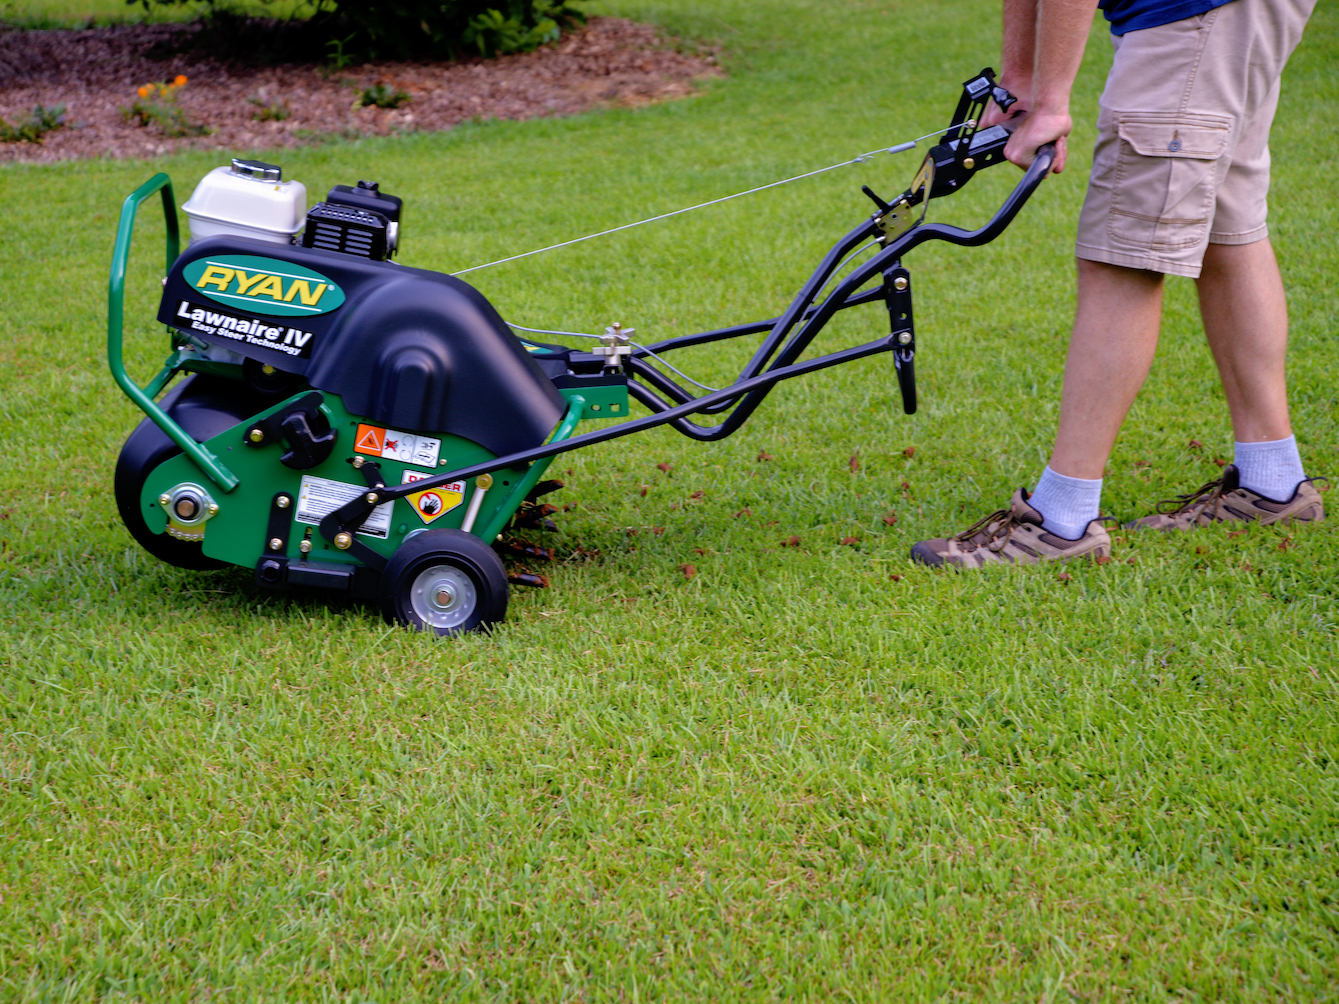 The Best Lawn Aerator Options